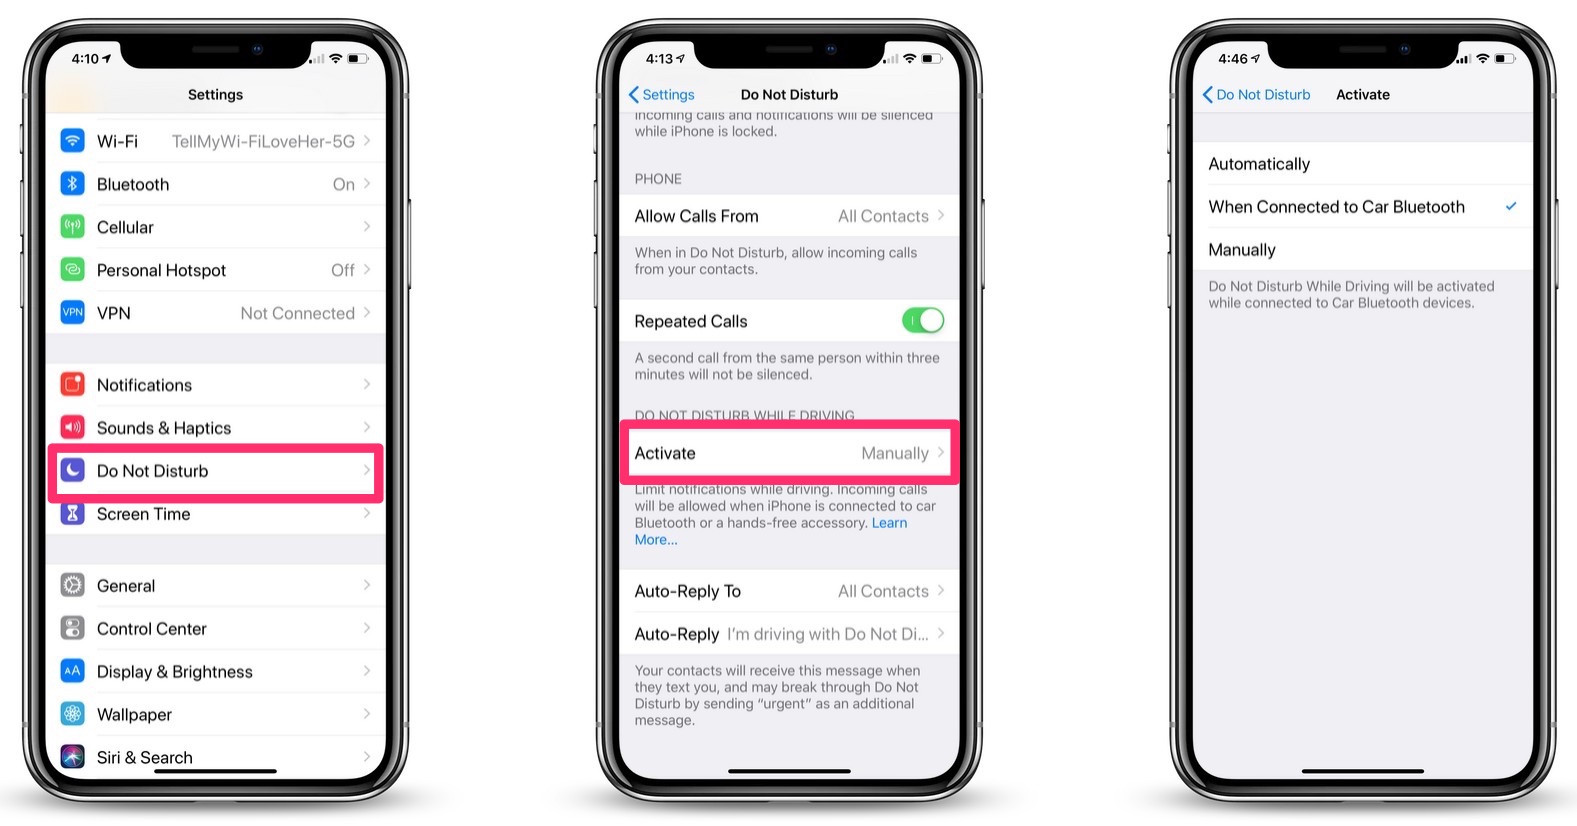 How to Turn on Do Not Disturb While Driving with iOS 11 & iOS 12 on iPhone